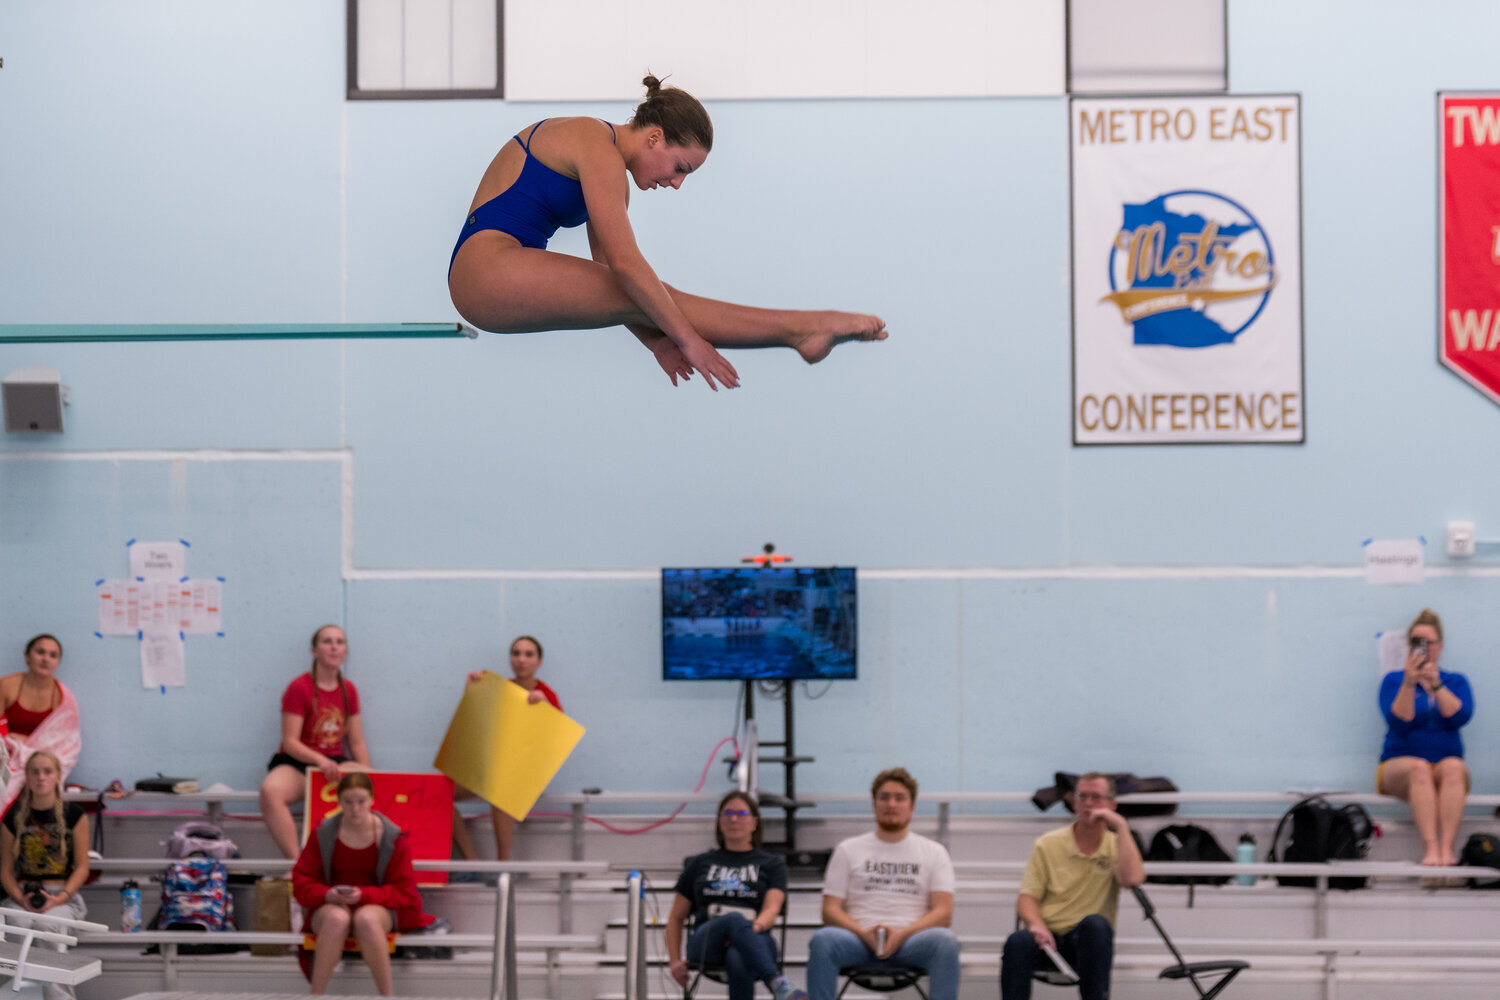 Aarness
Freshman Chloe Aarness took the Section 3AA diving title with a total score of 375.95. Here she is in the pike position perfectly in line with the 3-meter diving board. Aarness soared over the competition with her height off the 1-meter board in all 11 dives. Head Coach Katie McAlpin can be seen in the lower right corner video recording every dive her divers performed.